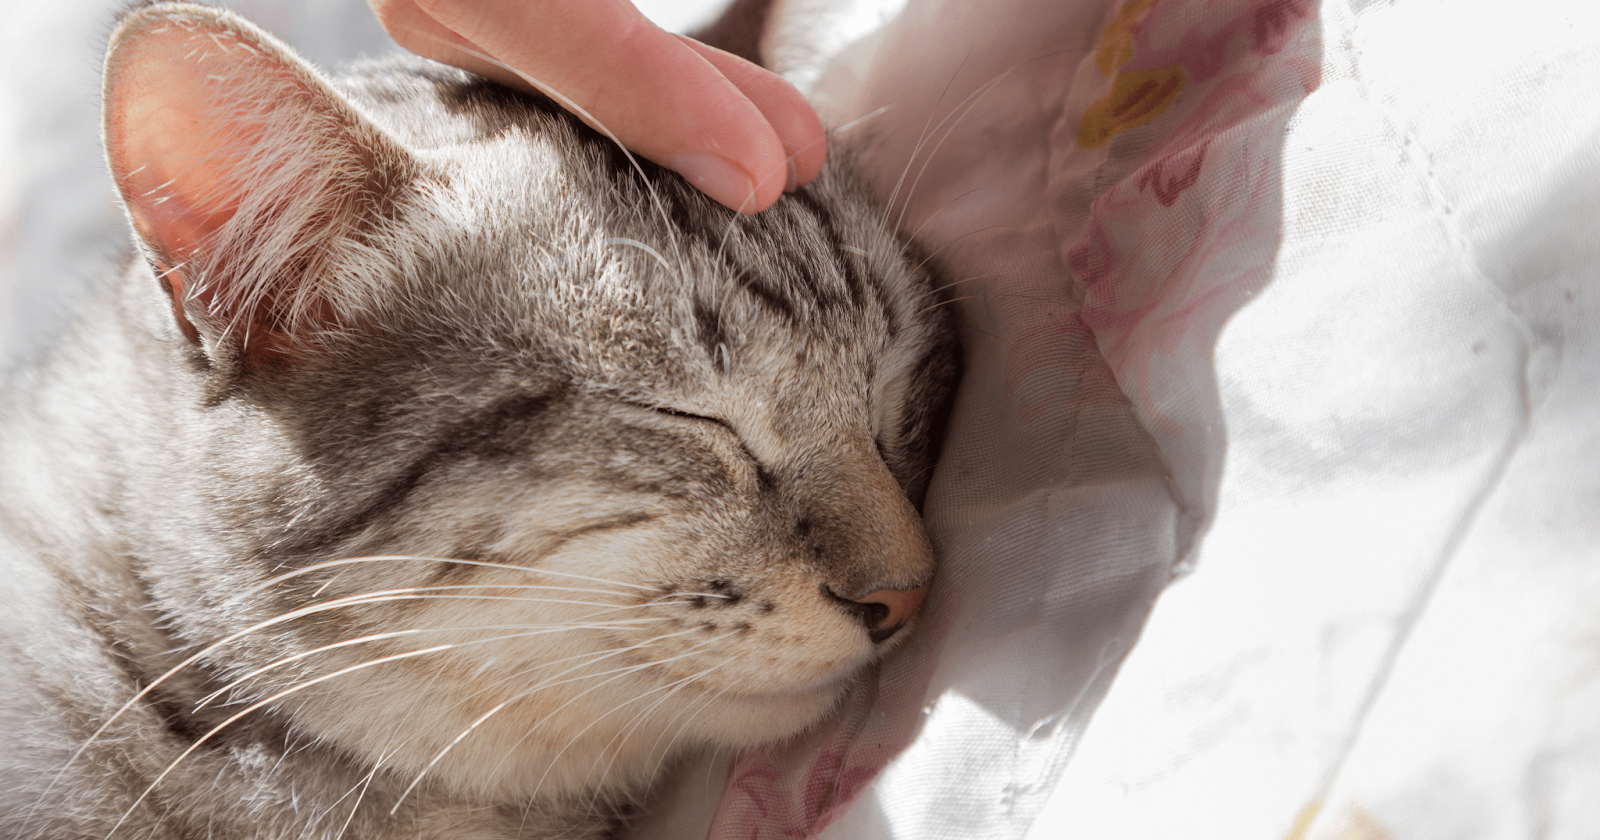 Tabby cat sleeping on blanket in sunshine getting pet gently on the head